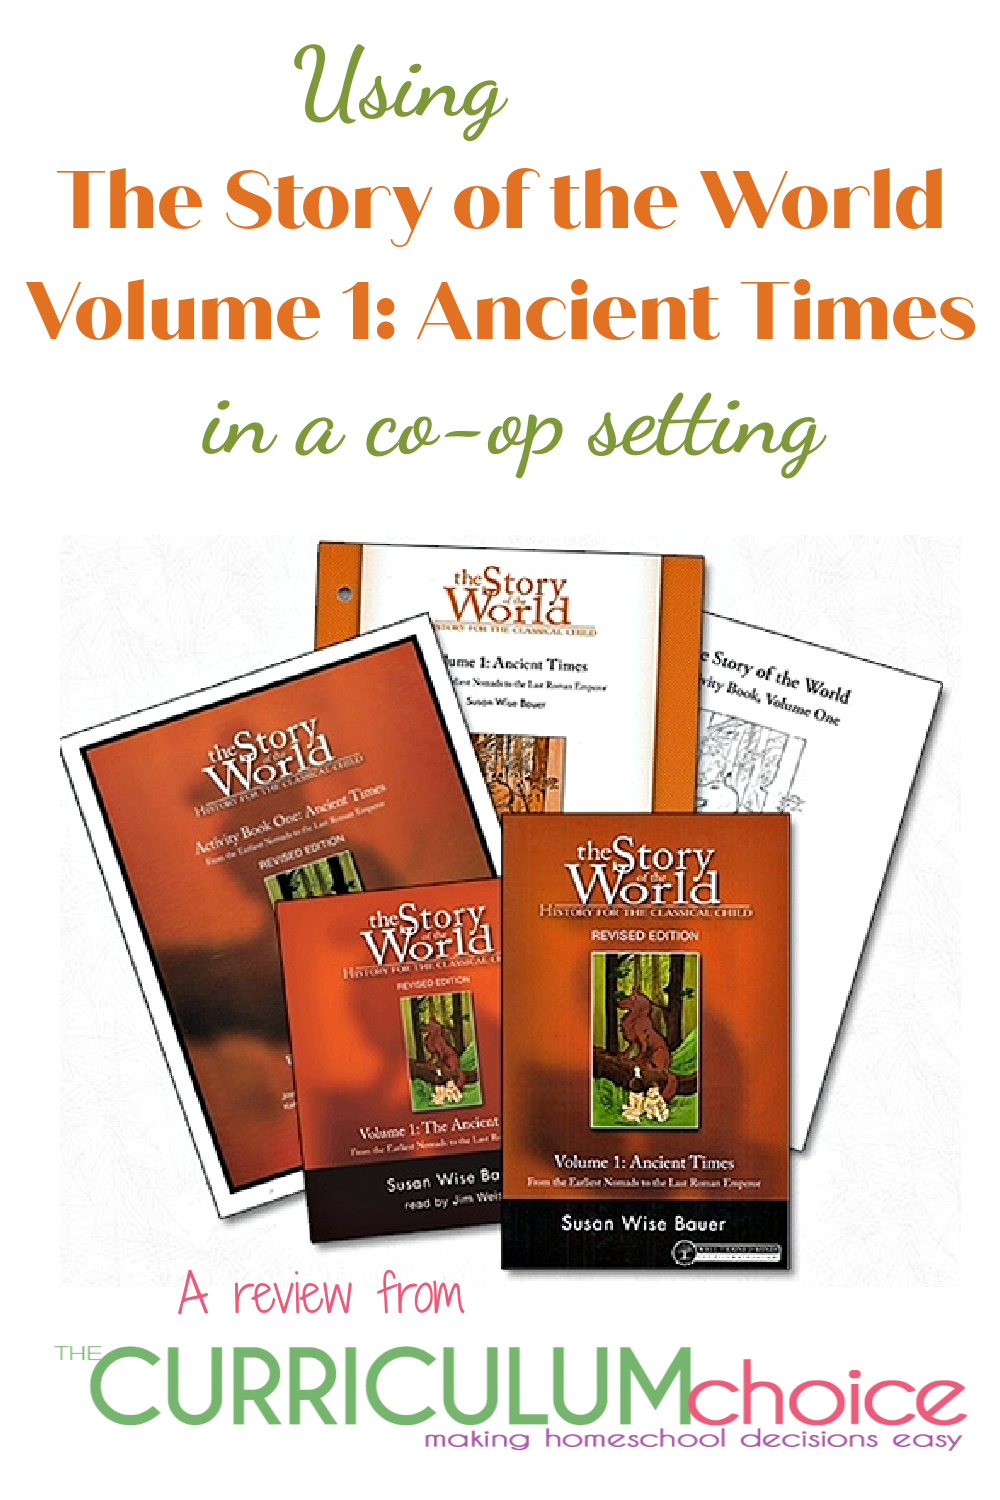 The Story of the World History for the Classical Child Volume 1 Ancient Times: This review is from the perspective of using it in a co-op setting. A review from The Curriculum Choice